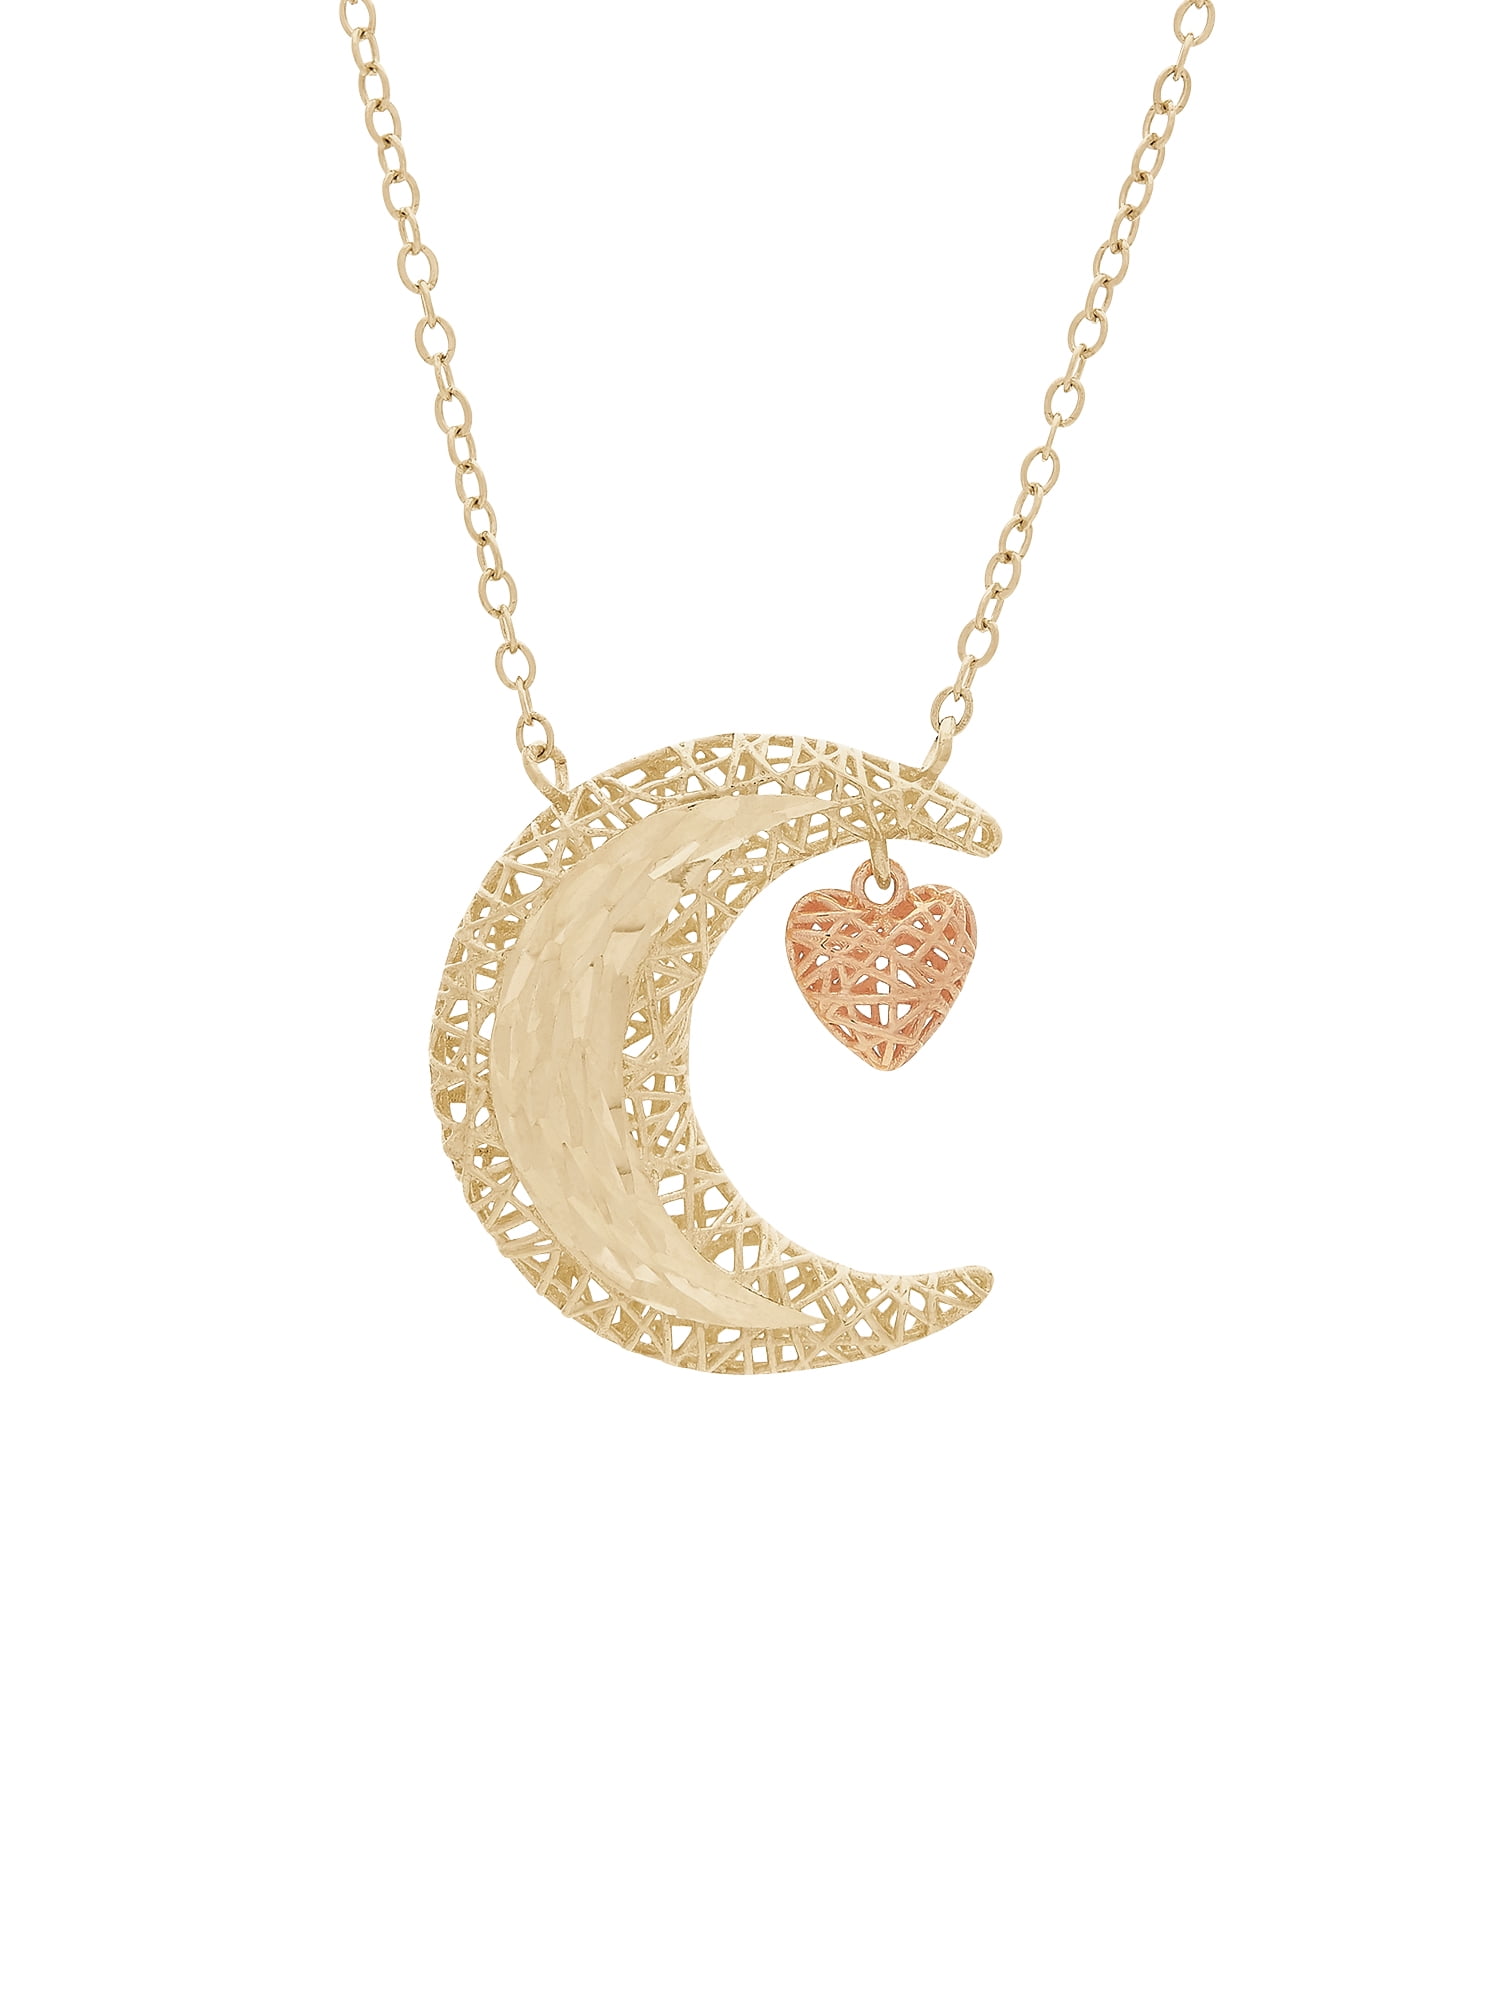 American Girl Doll Star and Moon Necklace